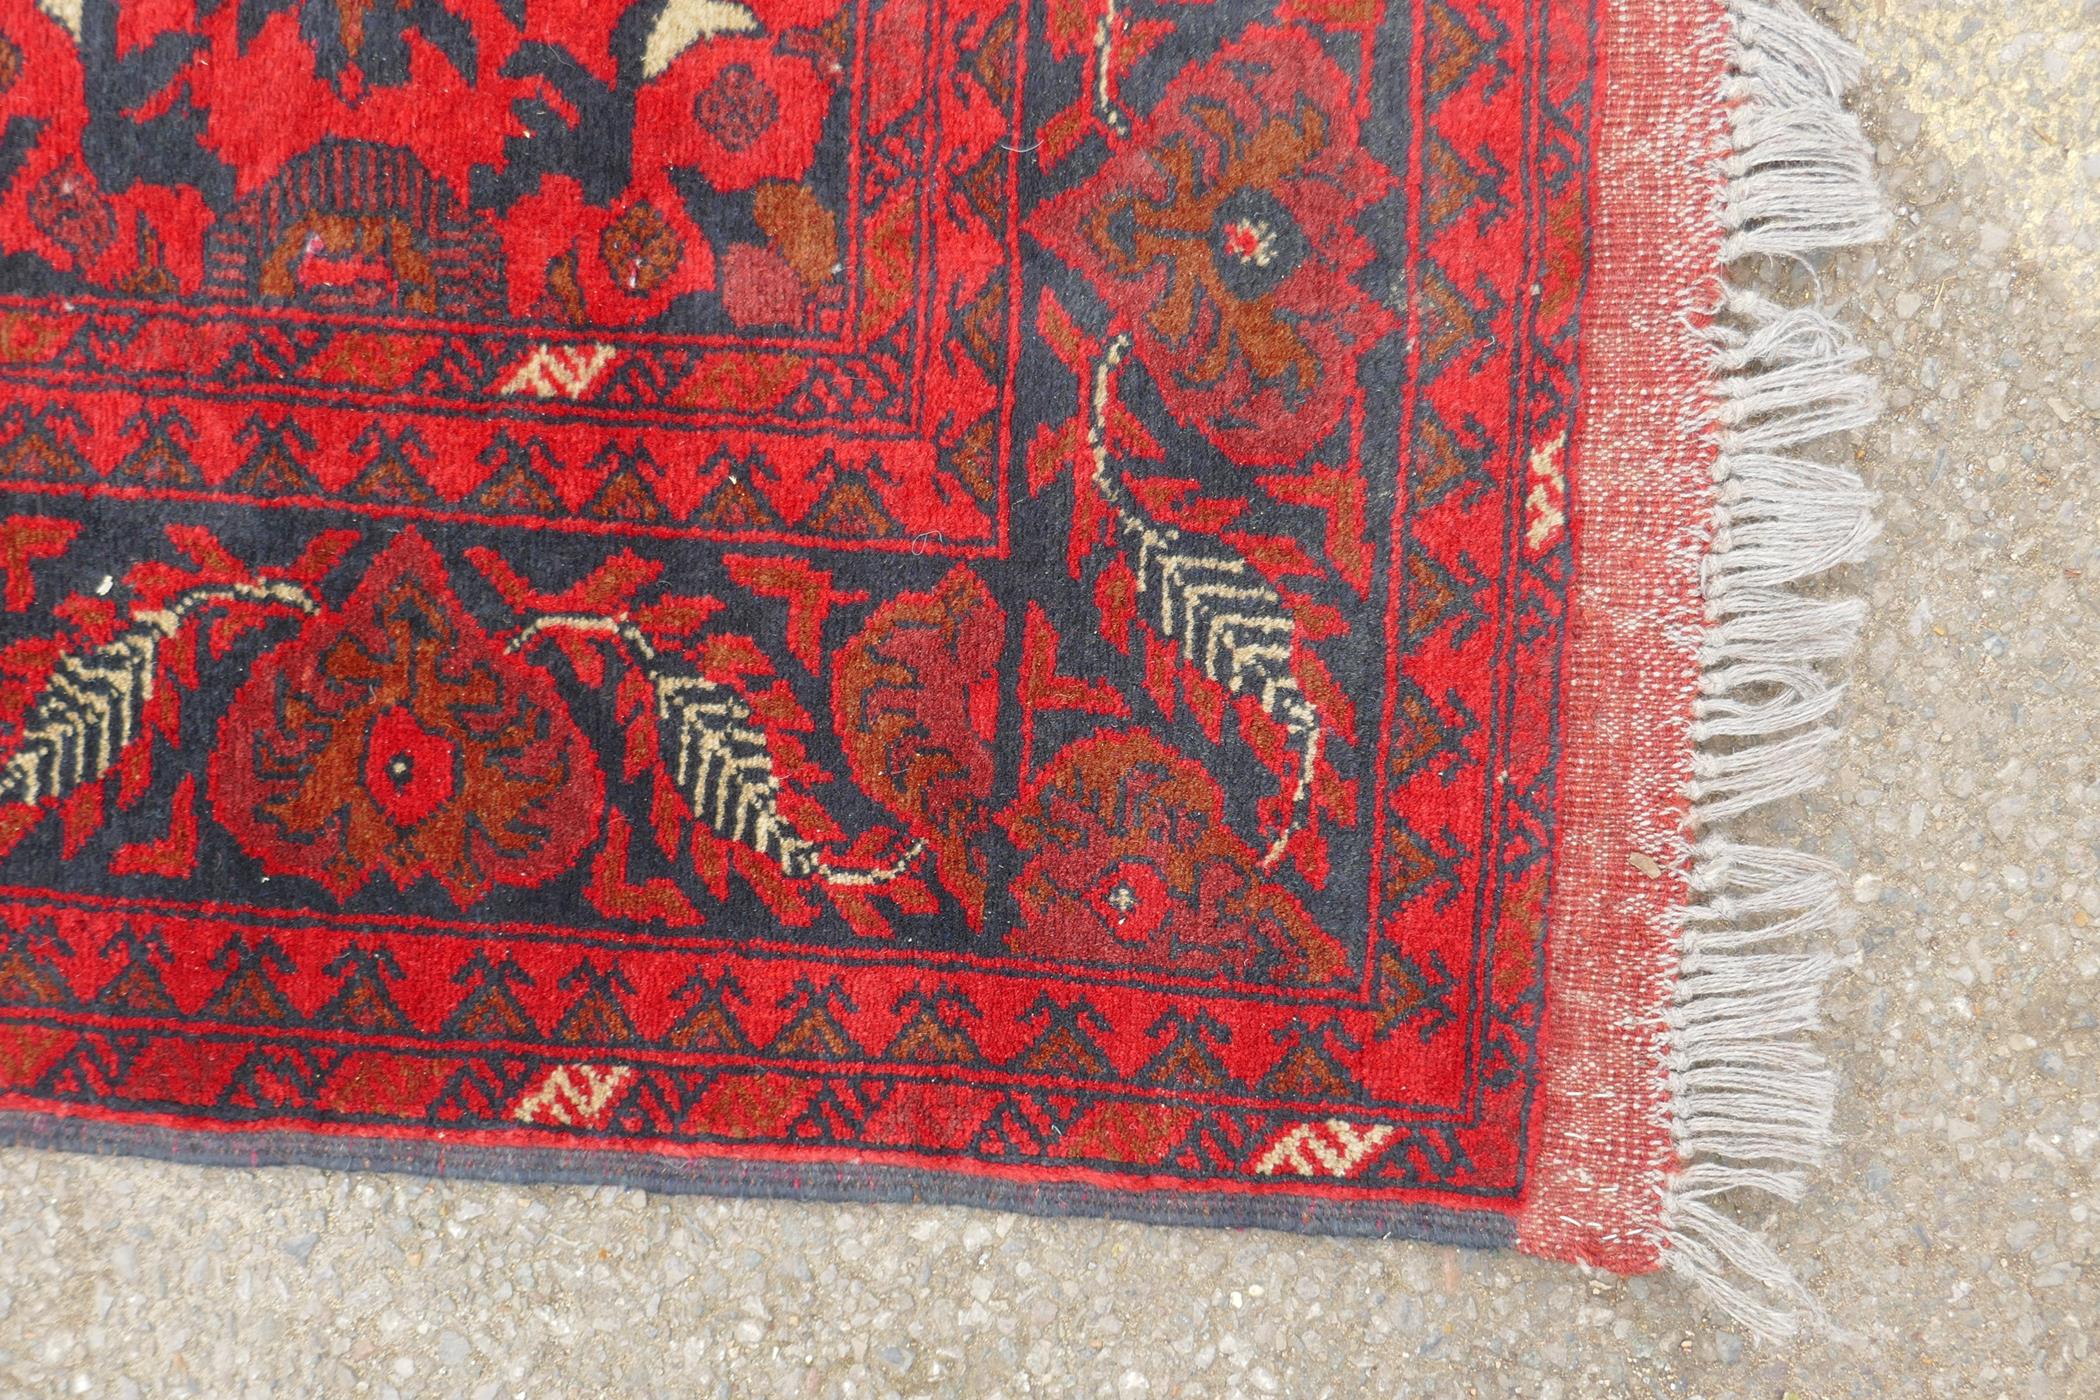 A Persian rich red ground wool runner with a floral medallion design and black borders, 33" x 116" - Image 4 of 5